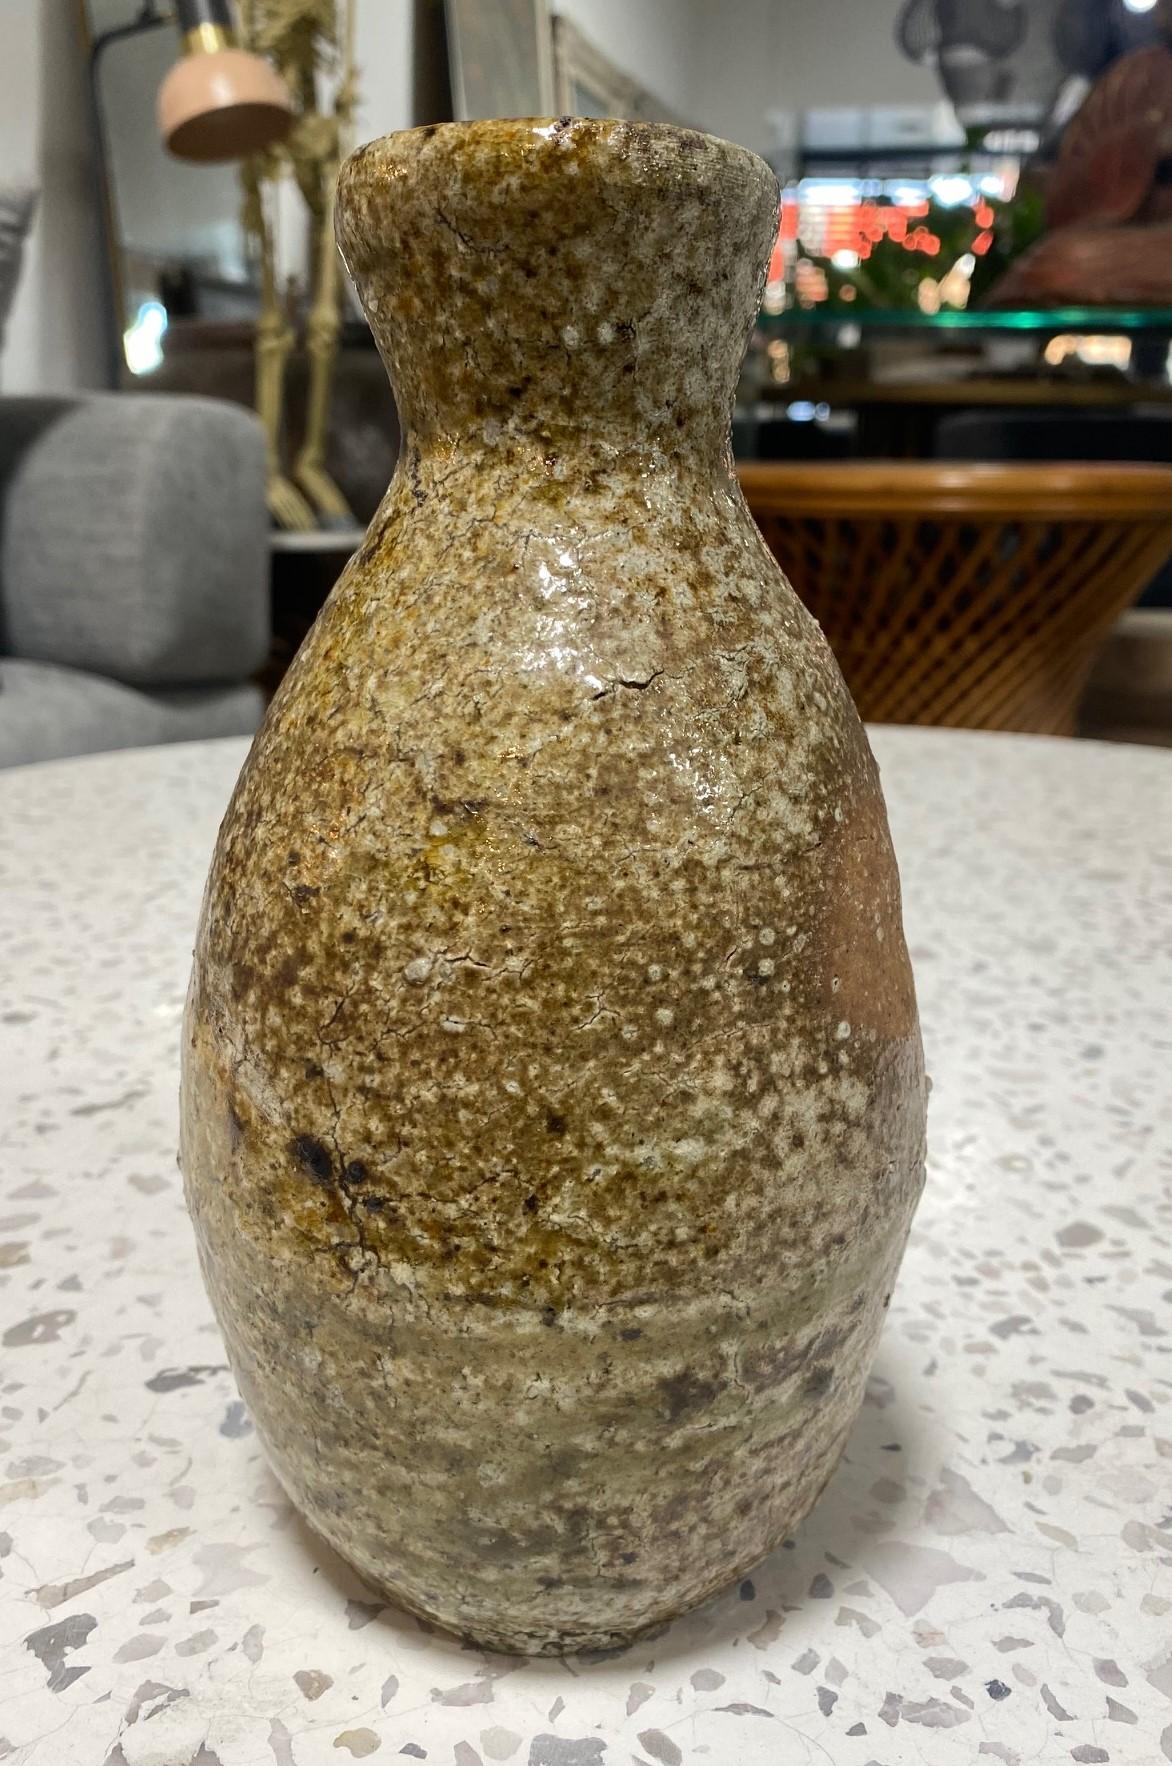 A quite wonderful Shigaraki pottery vase by renowned Japanese potter/ceramicist and Zen master Sugimoto Sadamitsu (1935-). Born in Tōkyō in 1935, Sugimoto is a self-taught, highly admired master of Iga and Shigaraki pottery and has received many